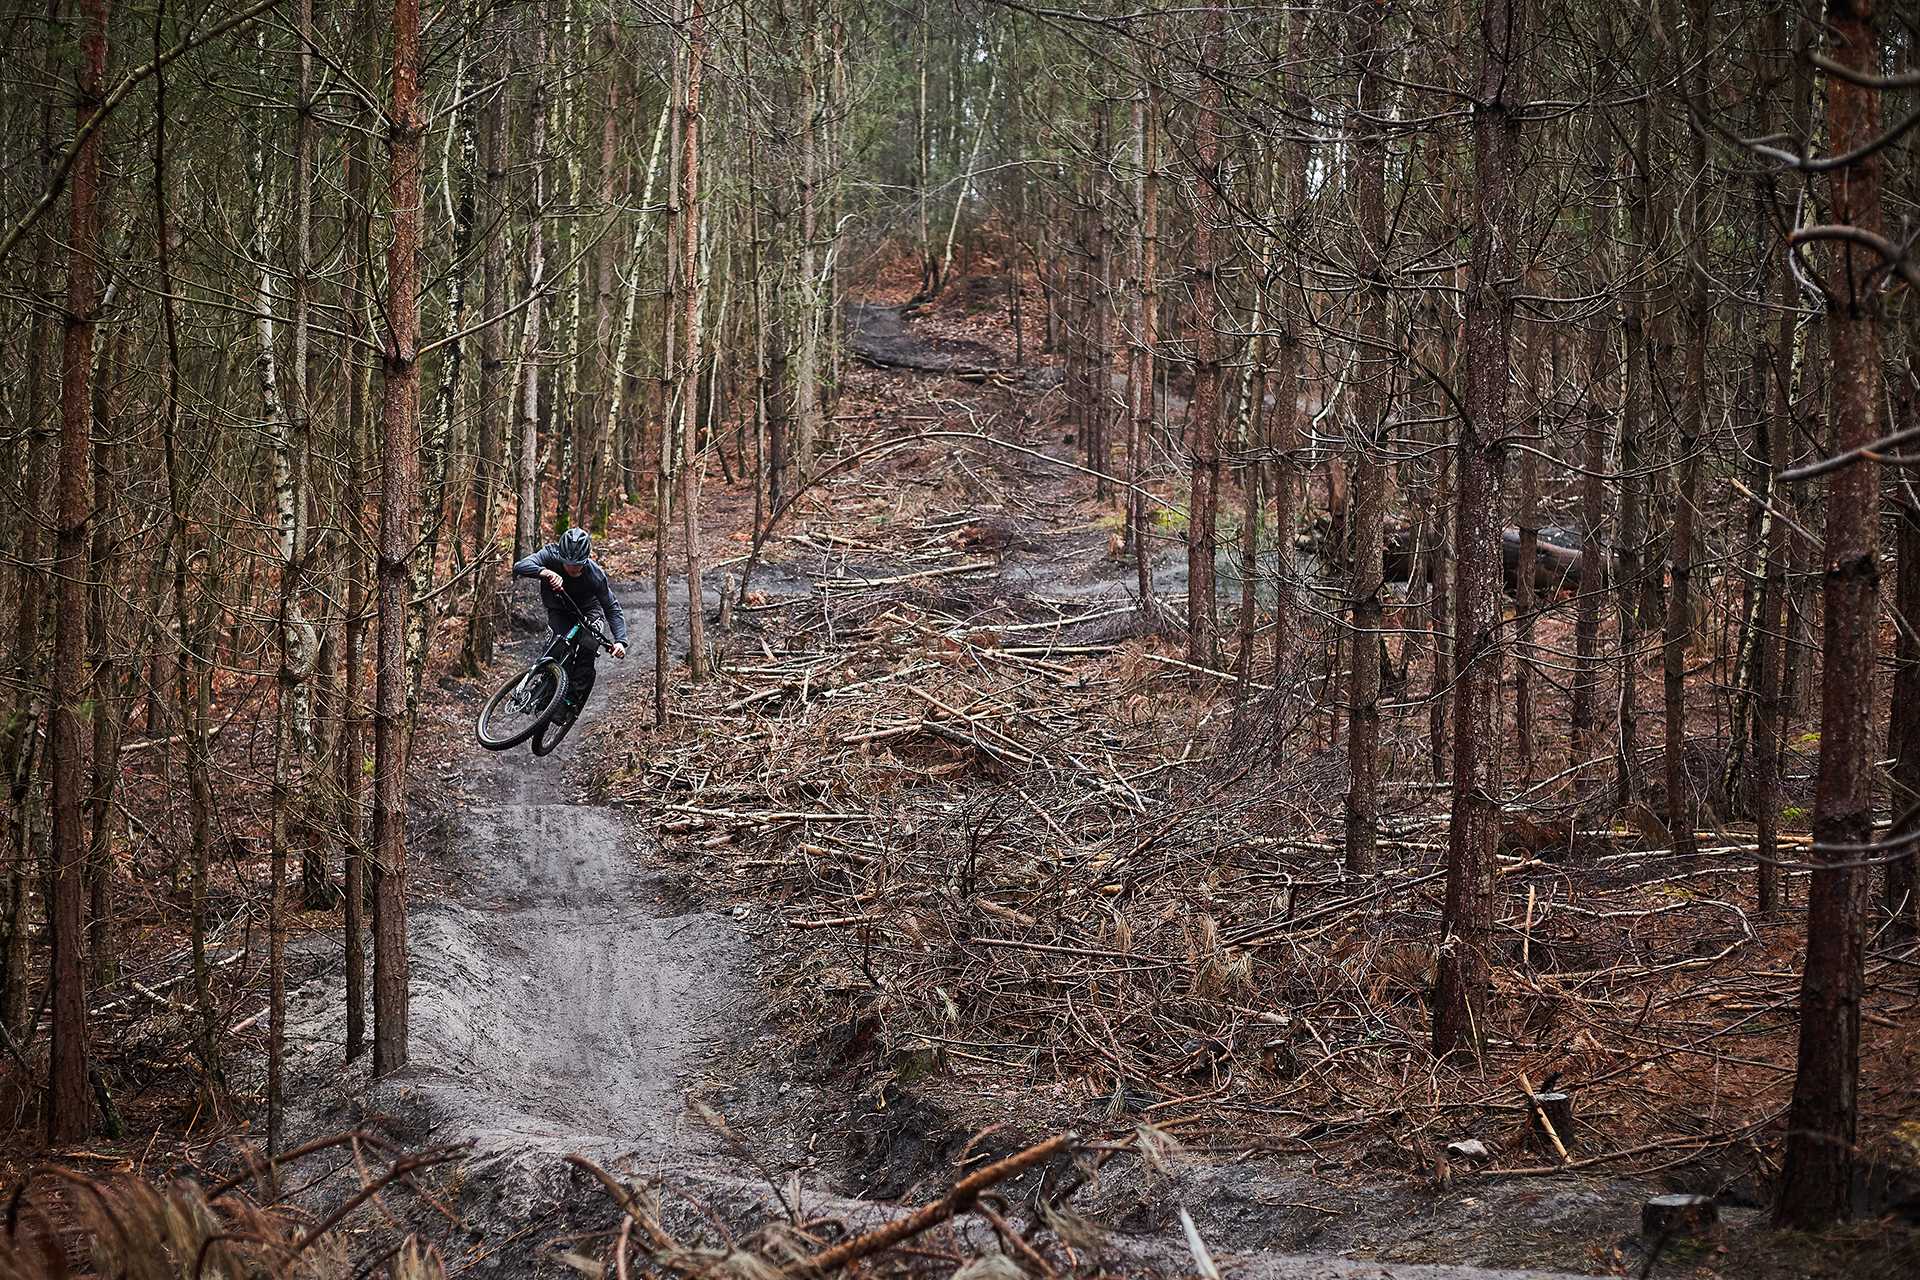 An image captured in Swinley forest where the mountain bike trails often wind through where the forestry team have been felling trees.